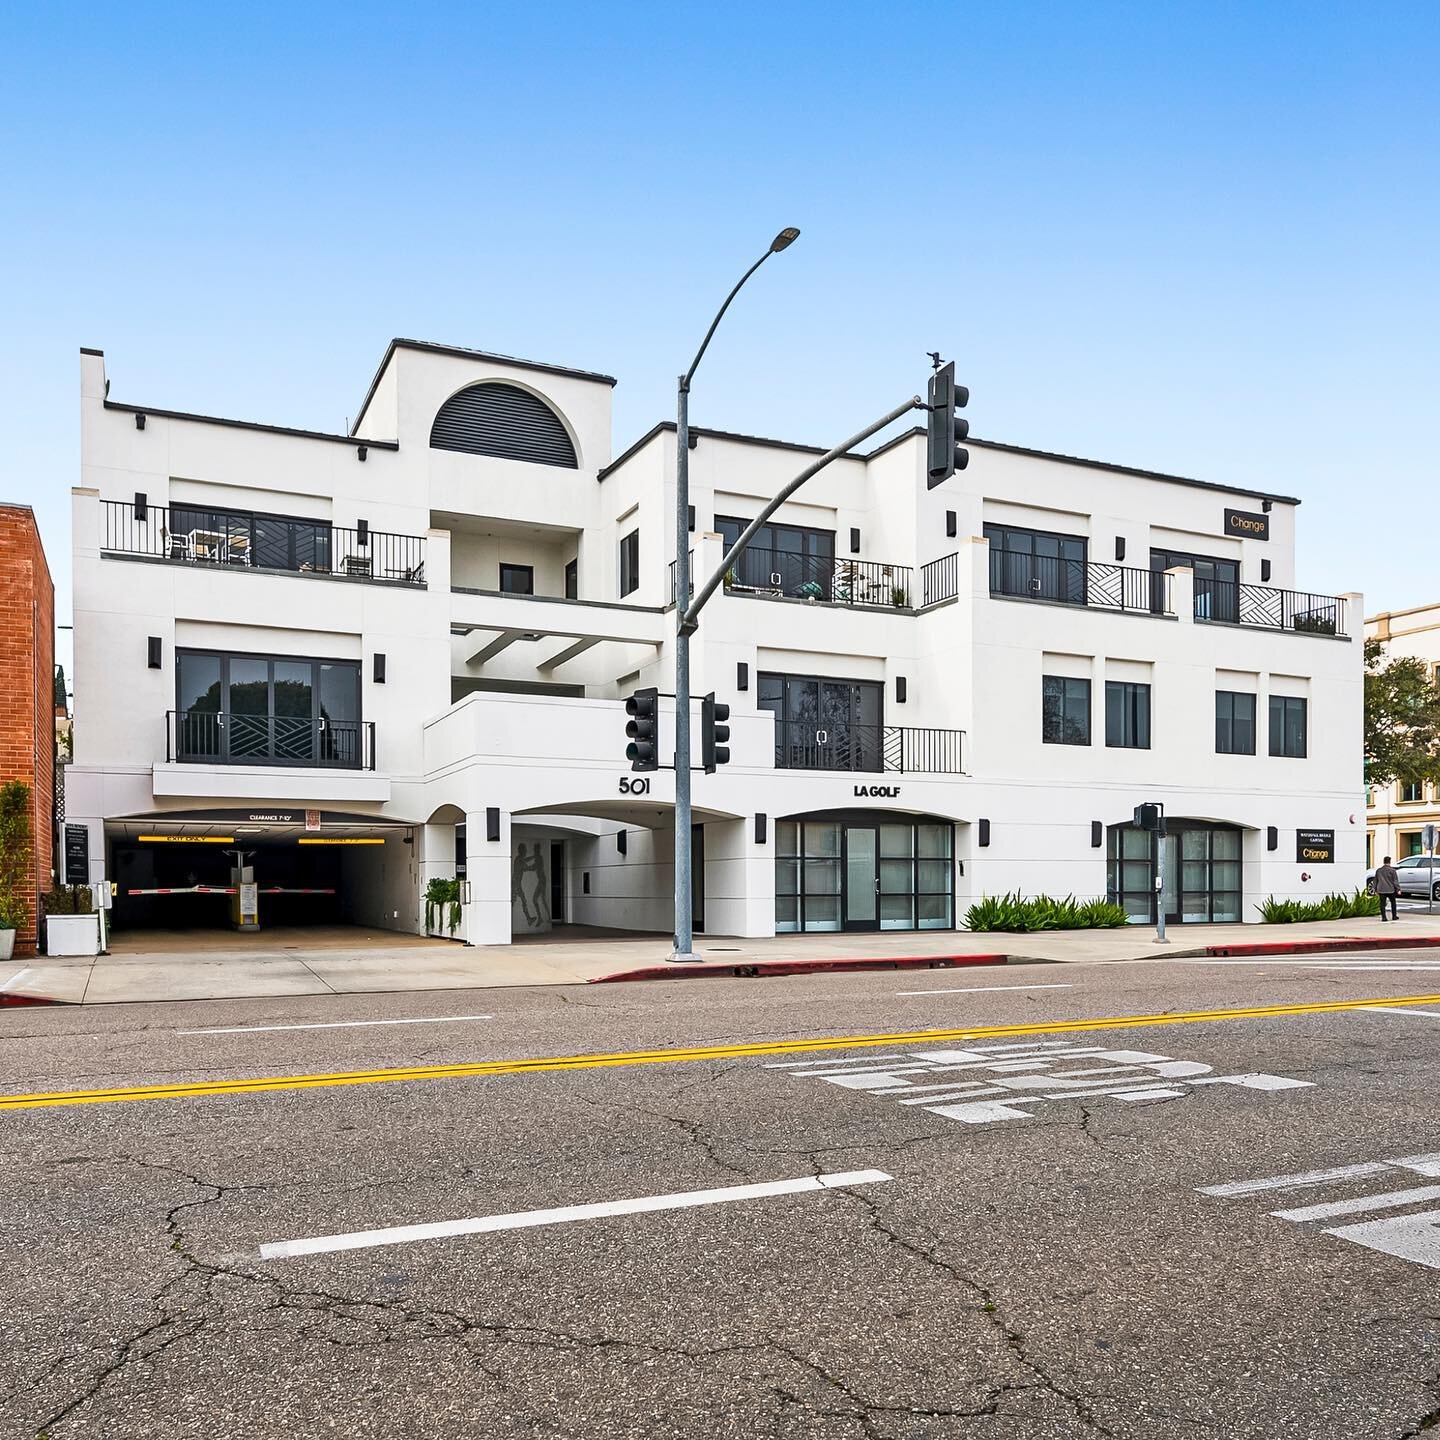 FOR LEASE: Boutique Office Building 501 S. Beverly Drive, Beverly Hills

Short term move-in ready office space available in a newly renovated building. 

* 5,000-10,000 SF of office space&nbsp;that can be shared or occupied in full
* Light and bright